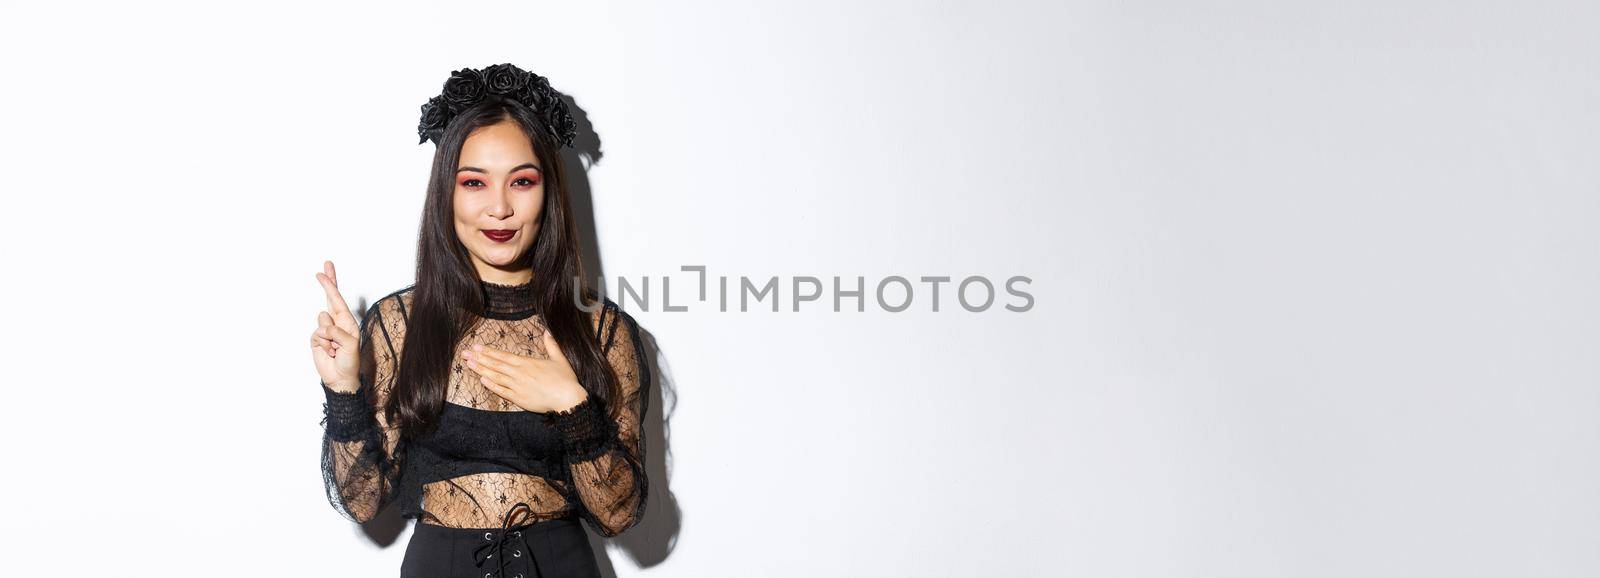 Image of attractive asian woman in halloween party dress making wish, holding hand on heart and cross fingers for good luck, standing over white background.